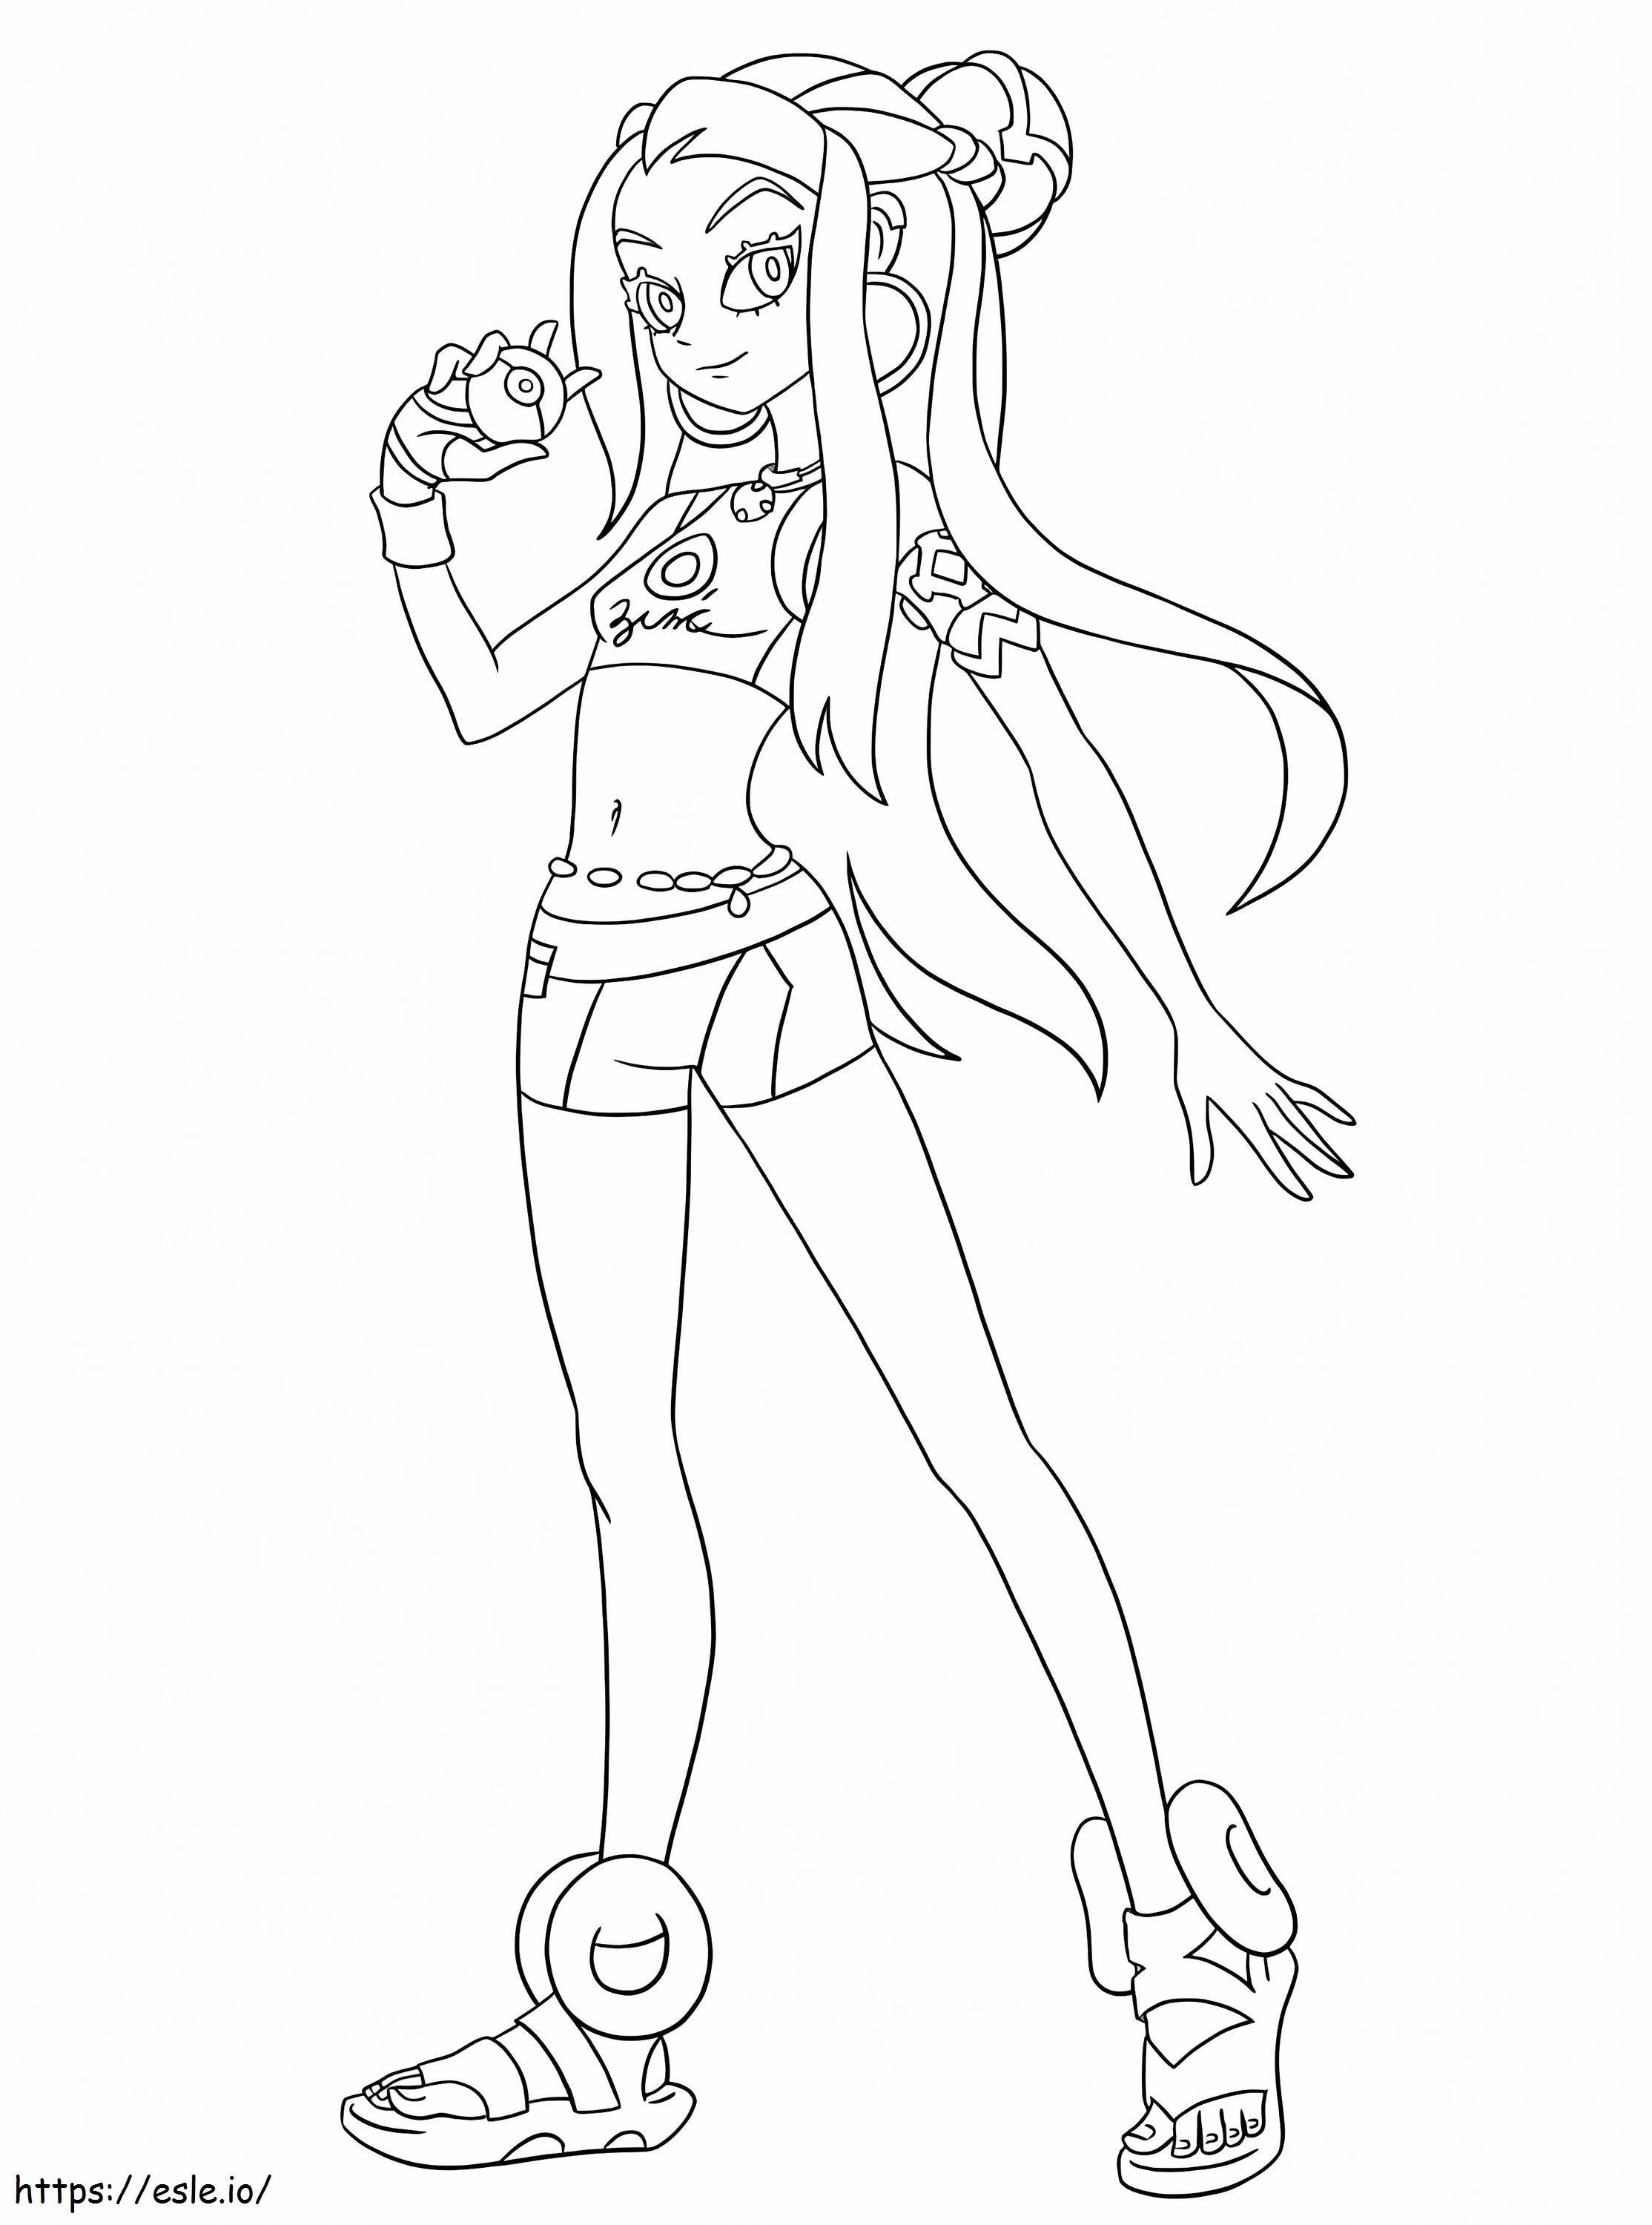 Nessa Pokemon Gym Leader coloring page